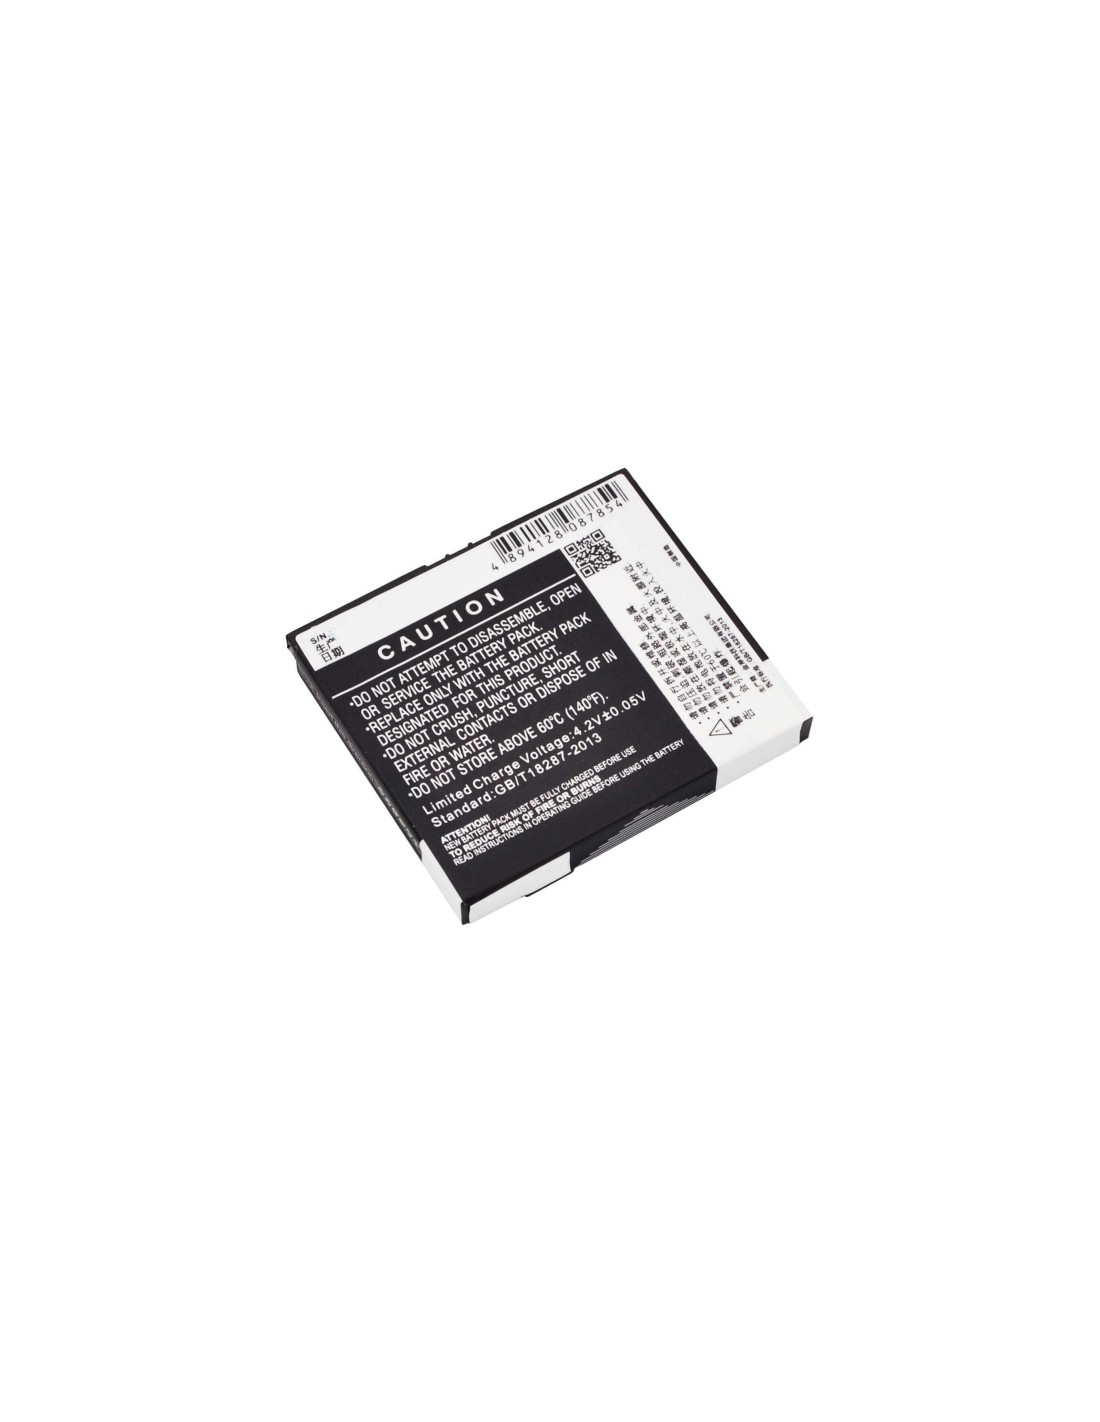 Battery for K-Touch V818, A912, A915 3.7V, 850mAh - 3.15Wh